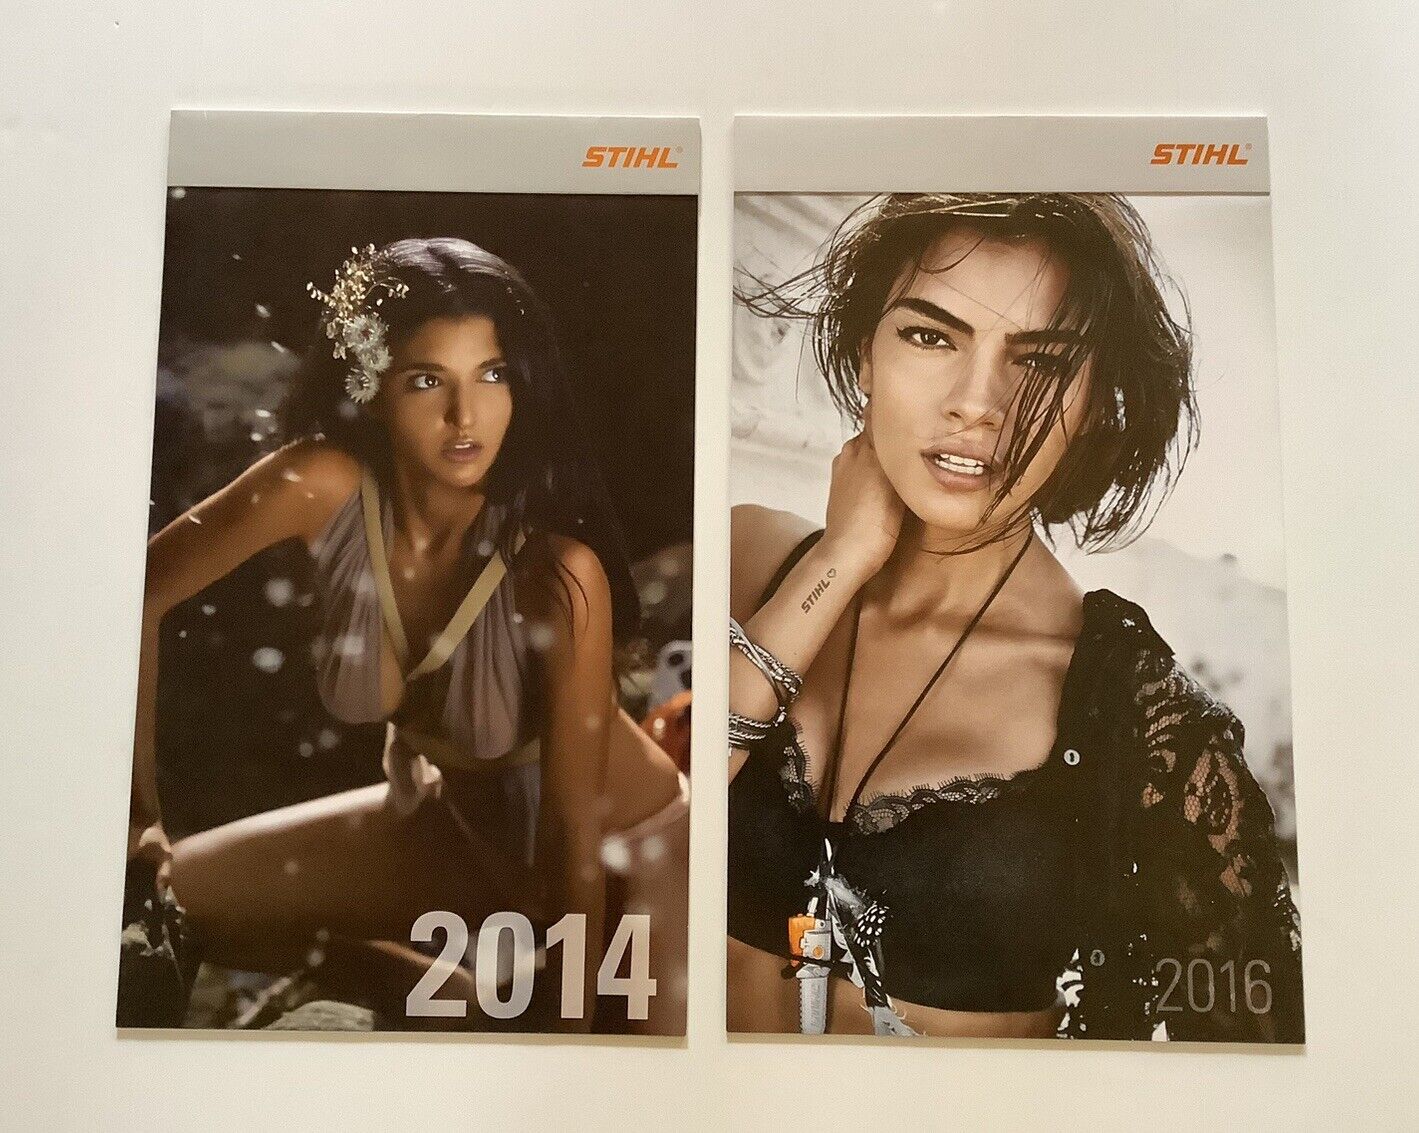 Lot of 2 STIHL Chainsaw - Power Tools Calendars (2014 & 2016) Printed in Germany